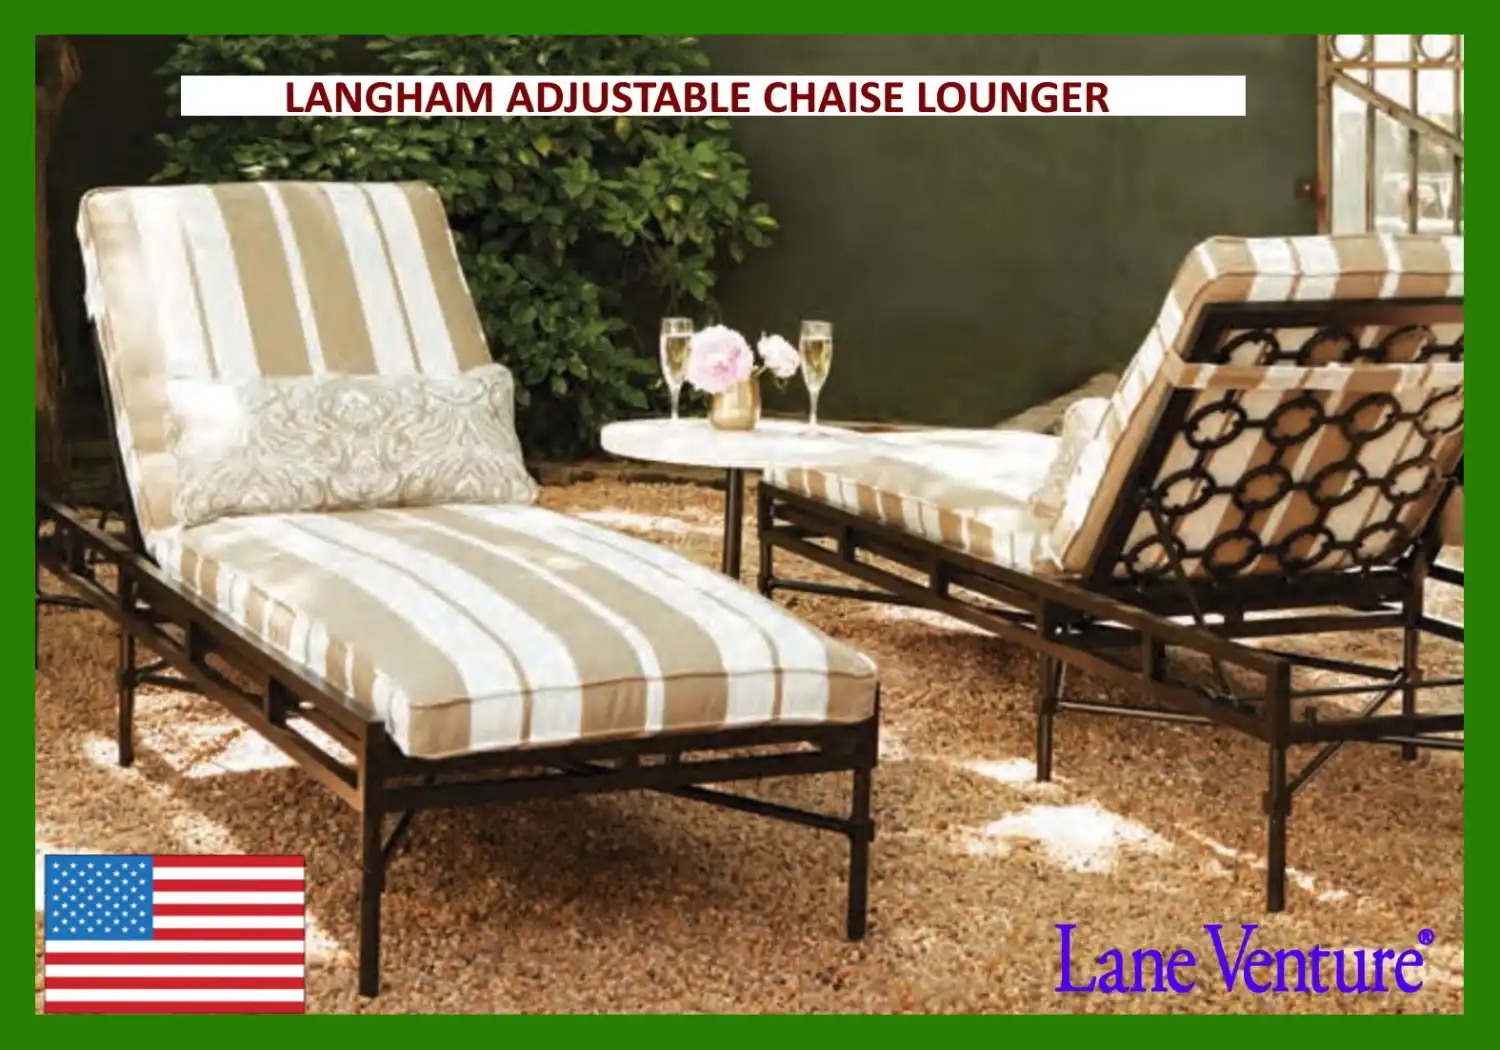 LANGHAM ADJUSTABLE CHAISE LOUNGER